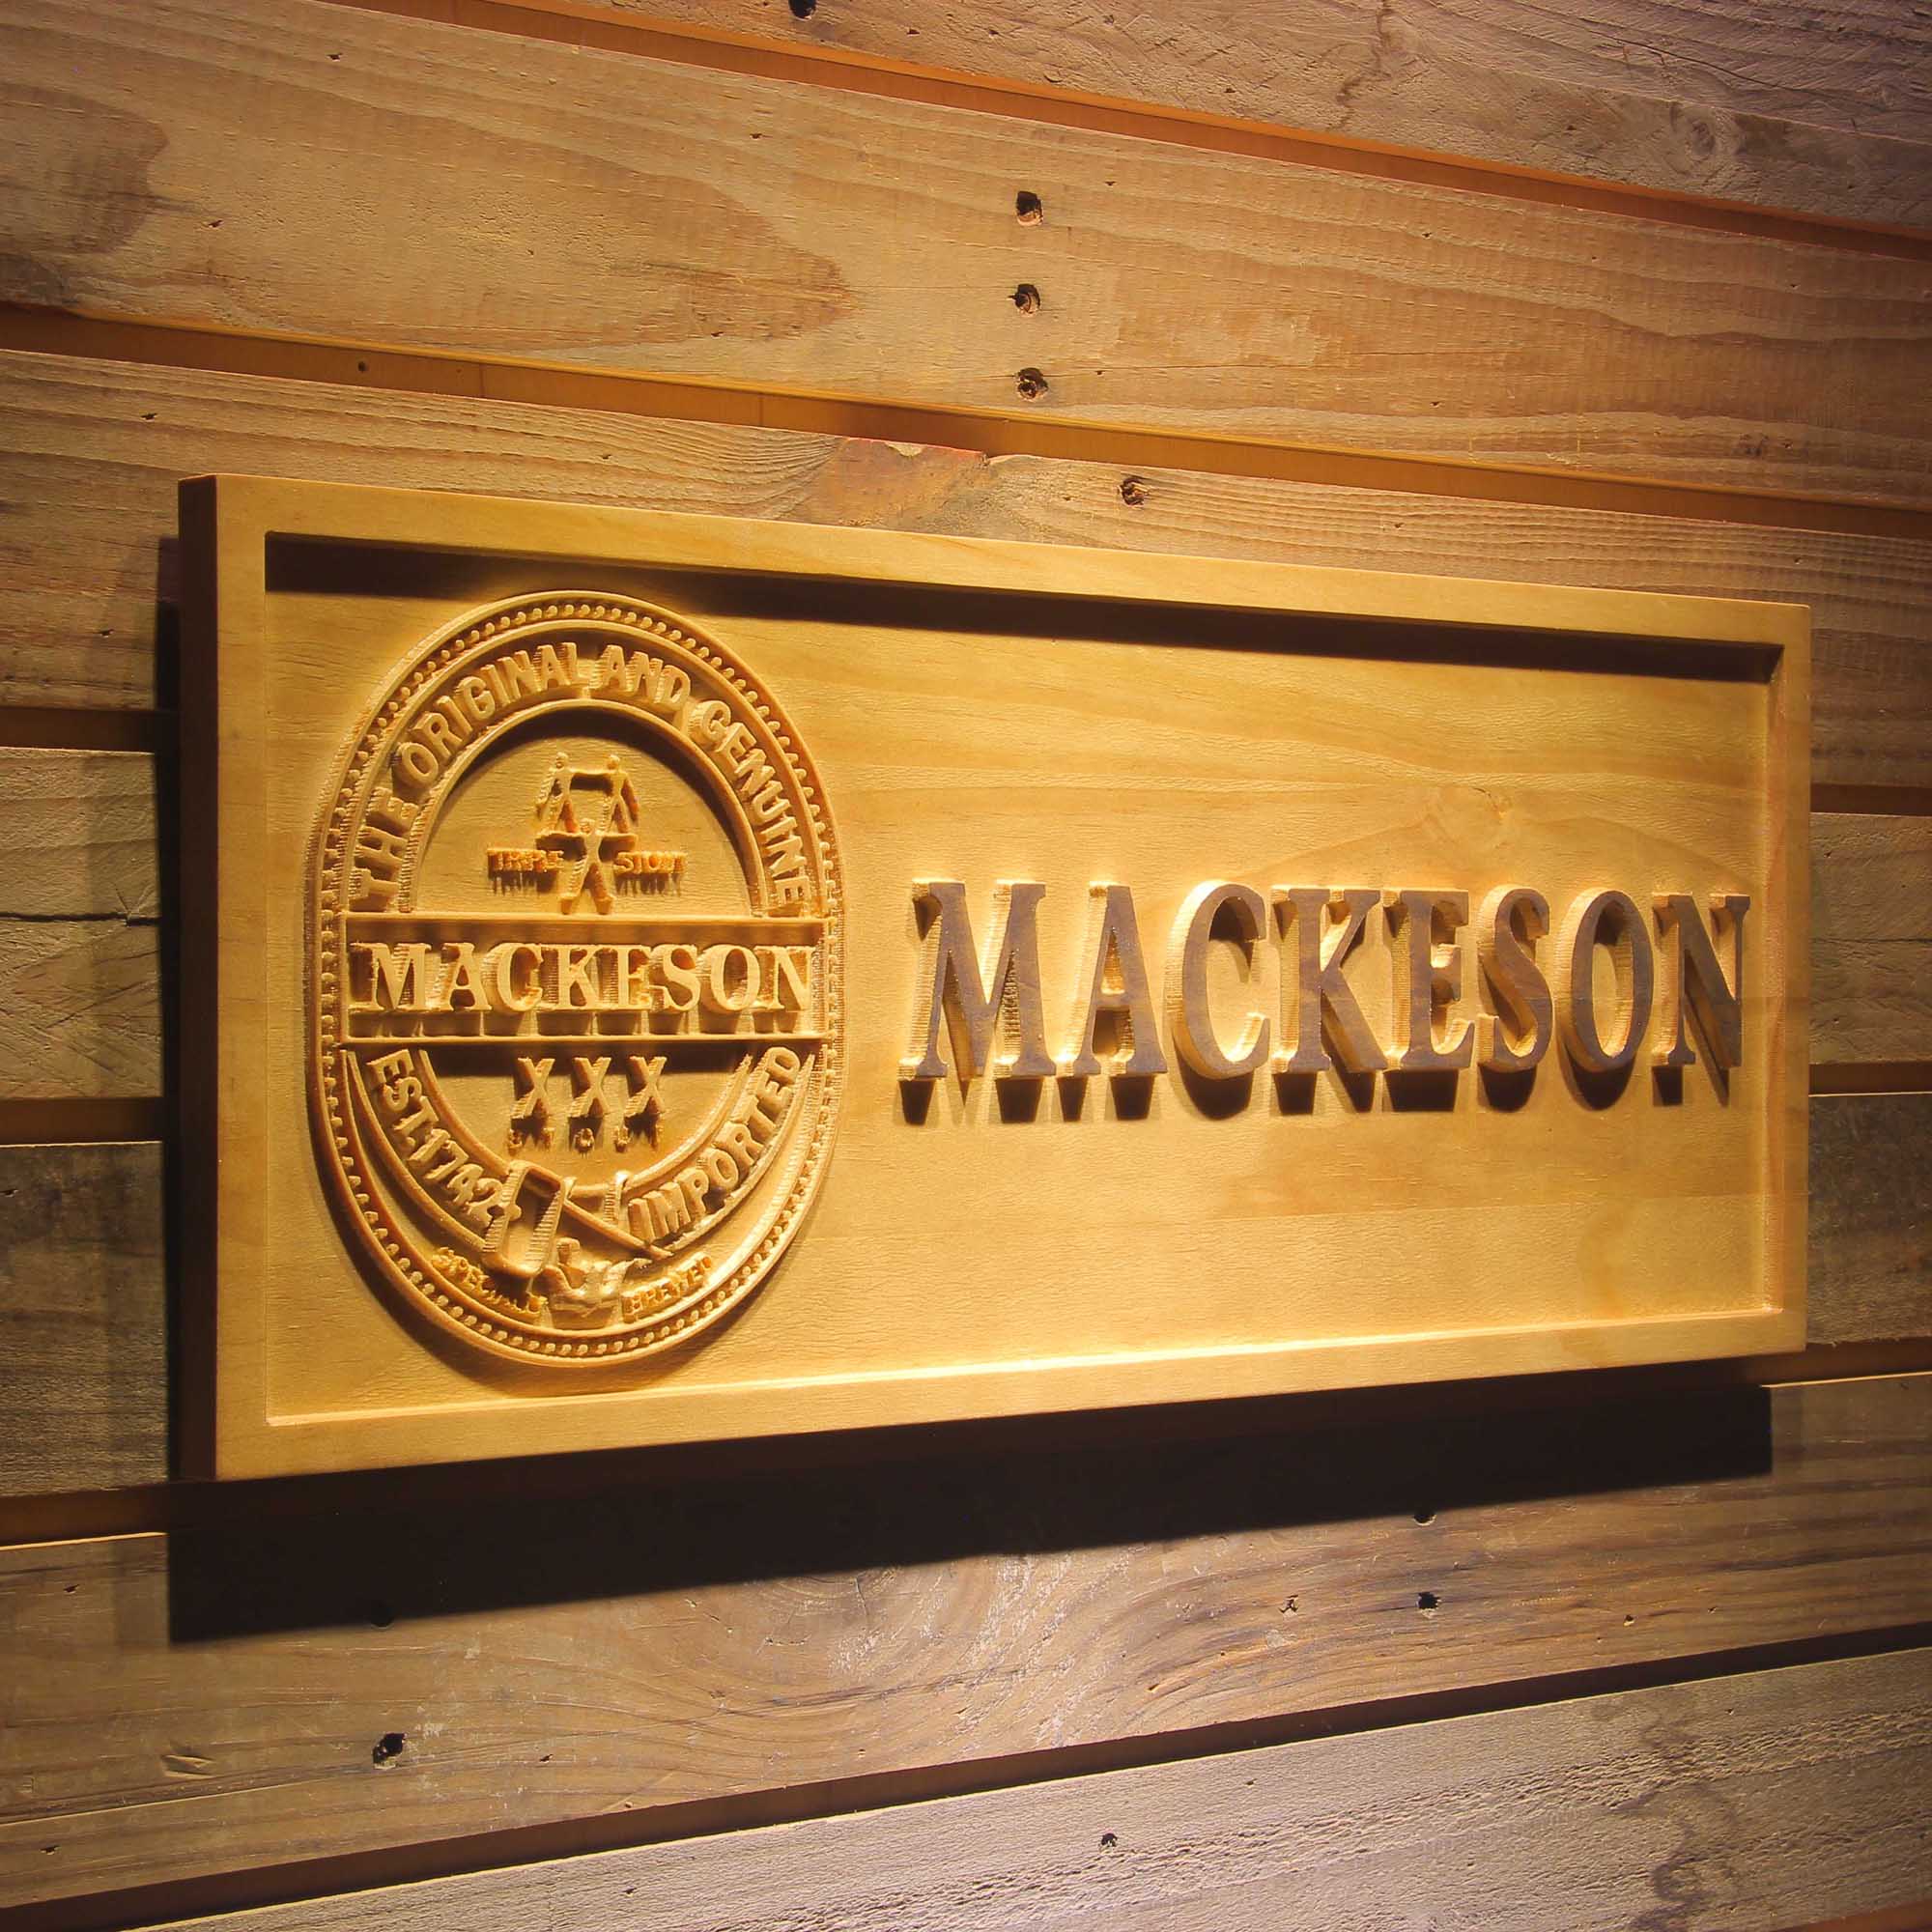 Mackeson's Stout 3D Solid Wooden Craving Sign